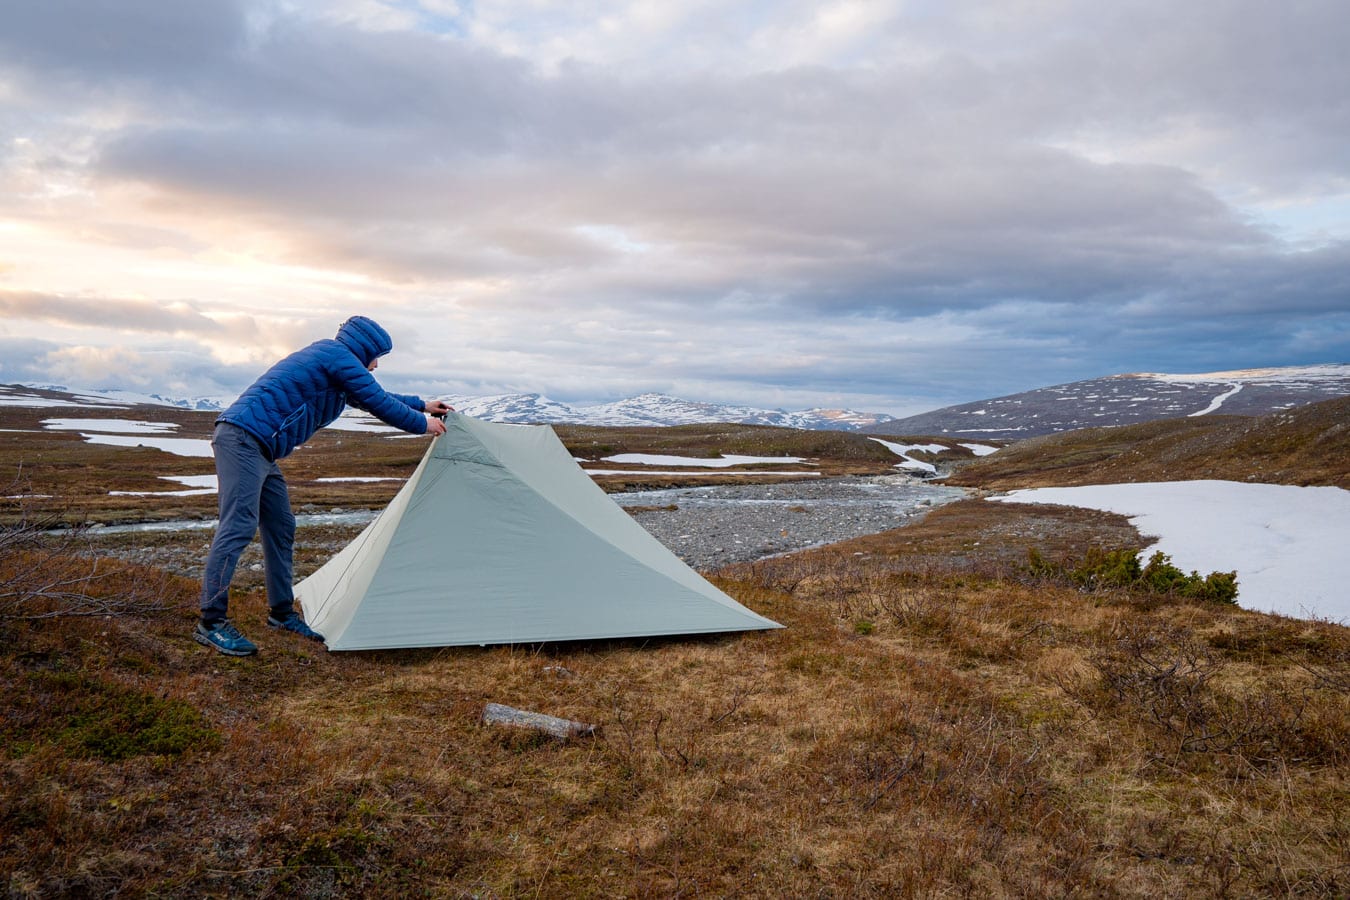 Hiker setting up a pyramid tent in Scandinavia